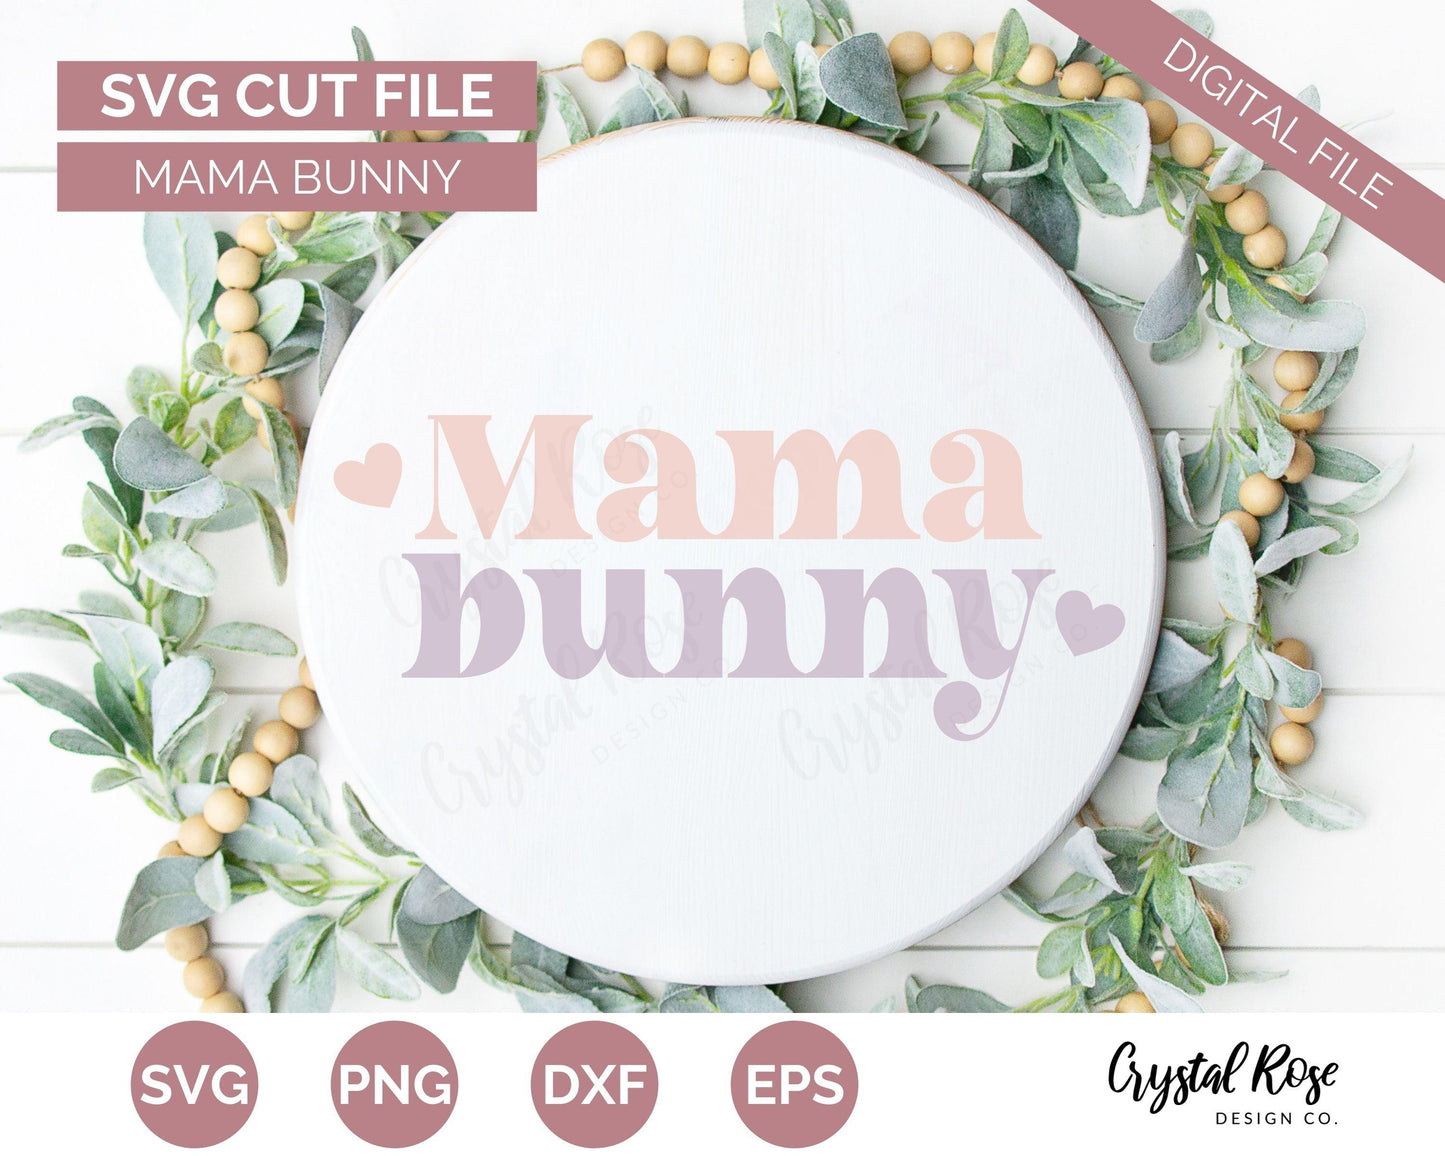 Mama Bunny SVG, Easter SVG, Digital Download, Cricut, Silhouette, Glowforge (includes svg/png/dxf/eps)